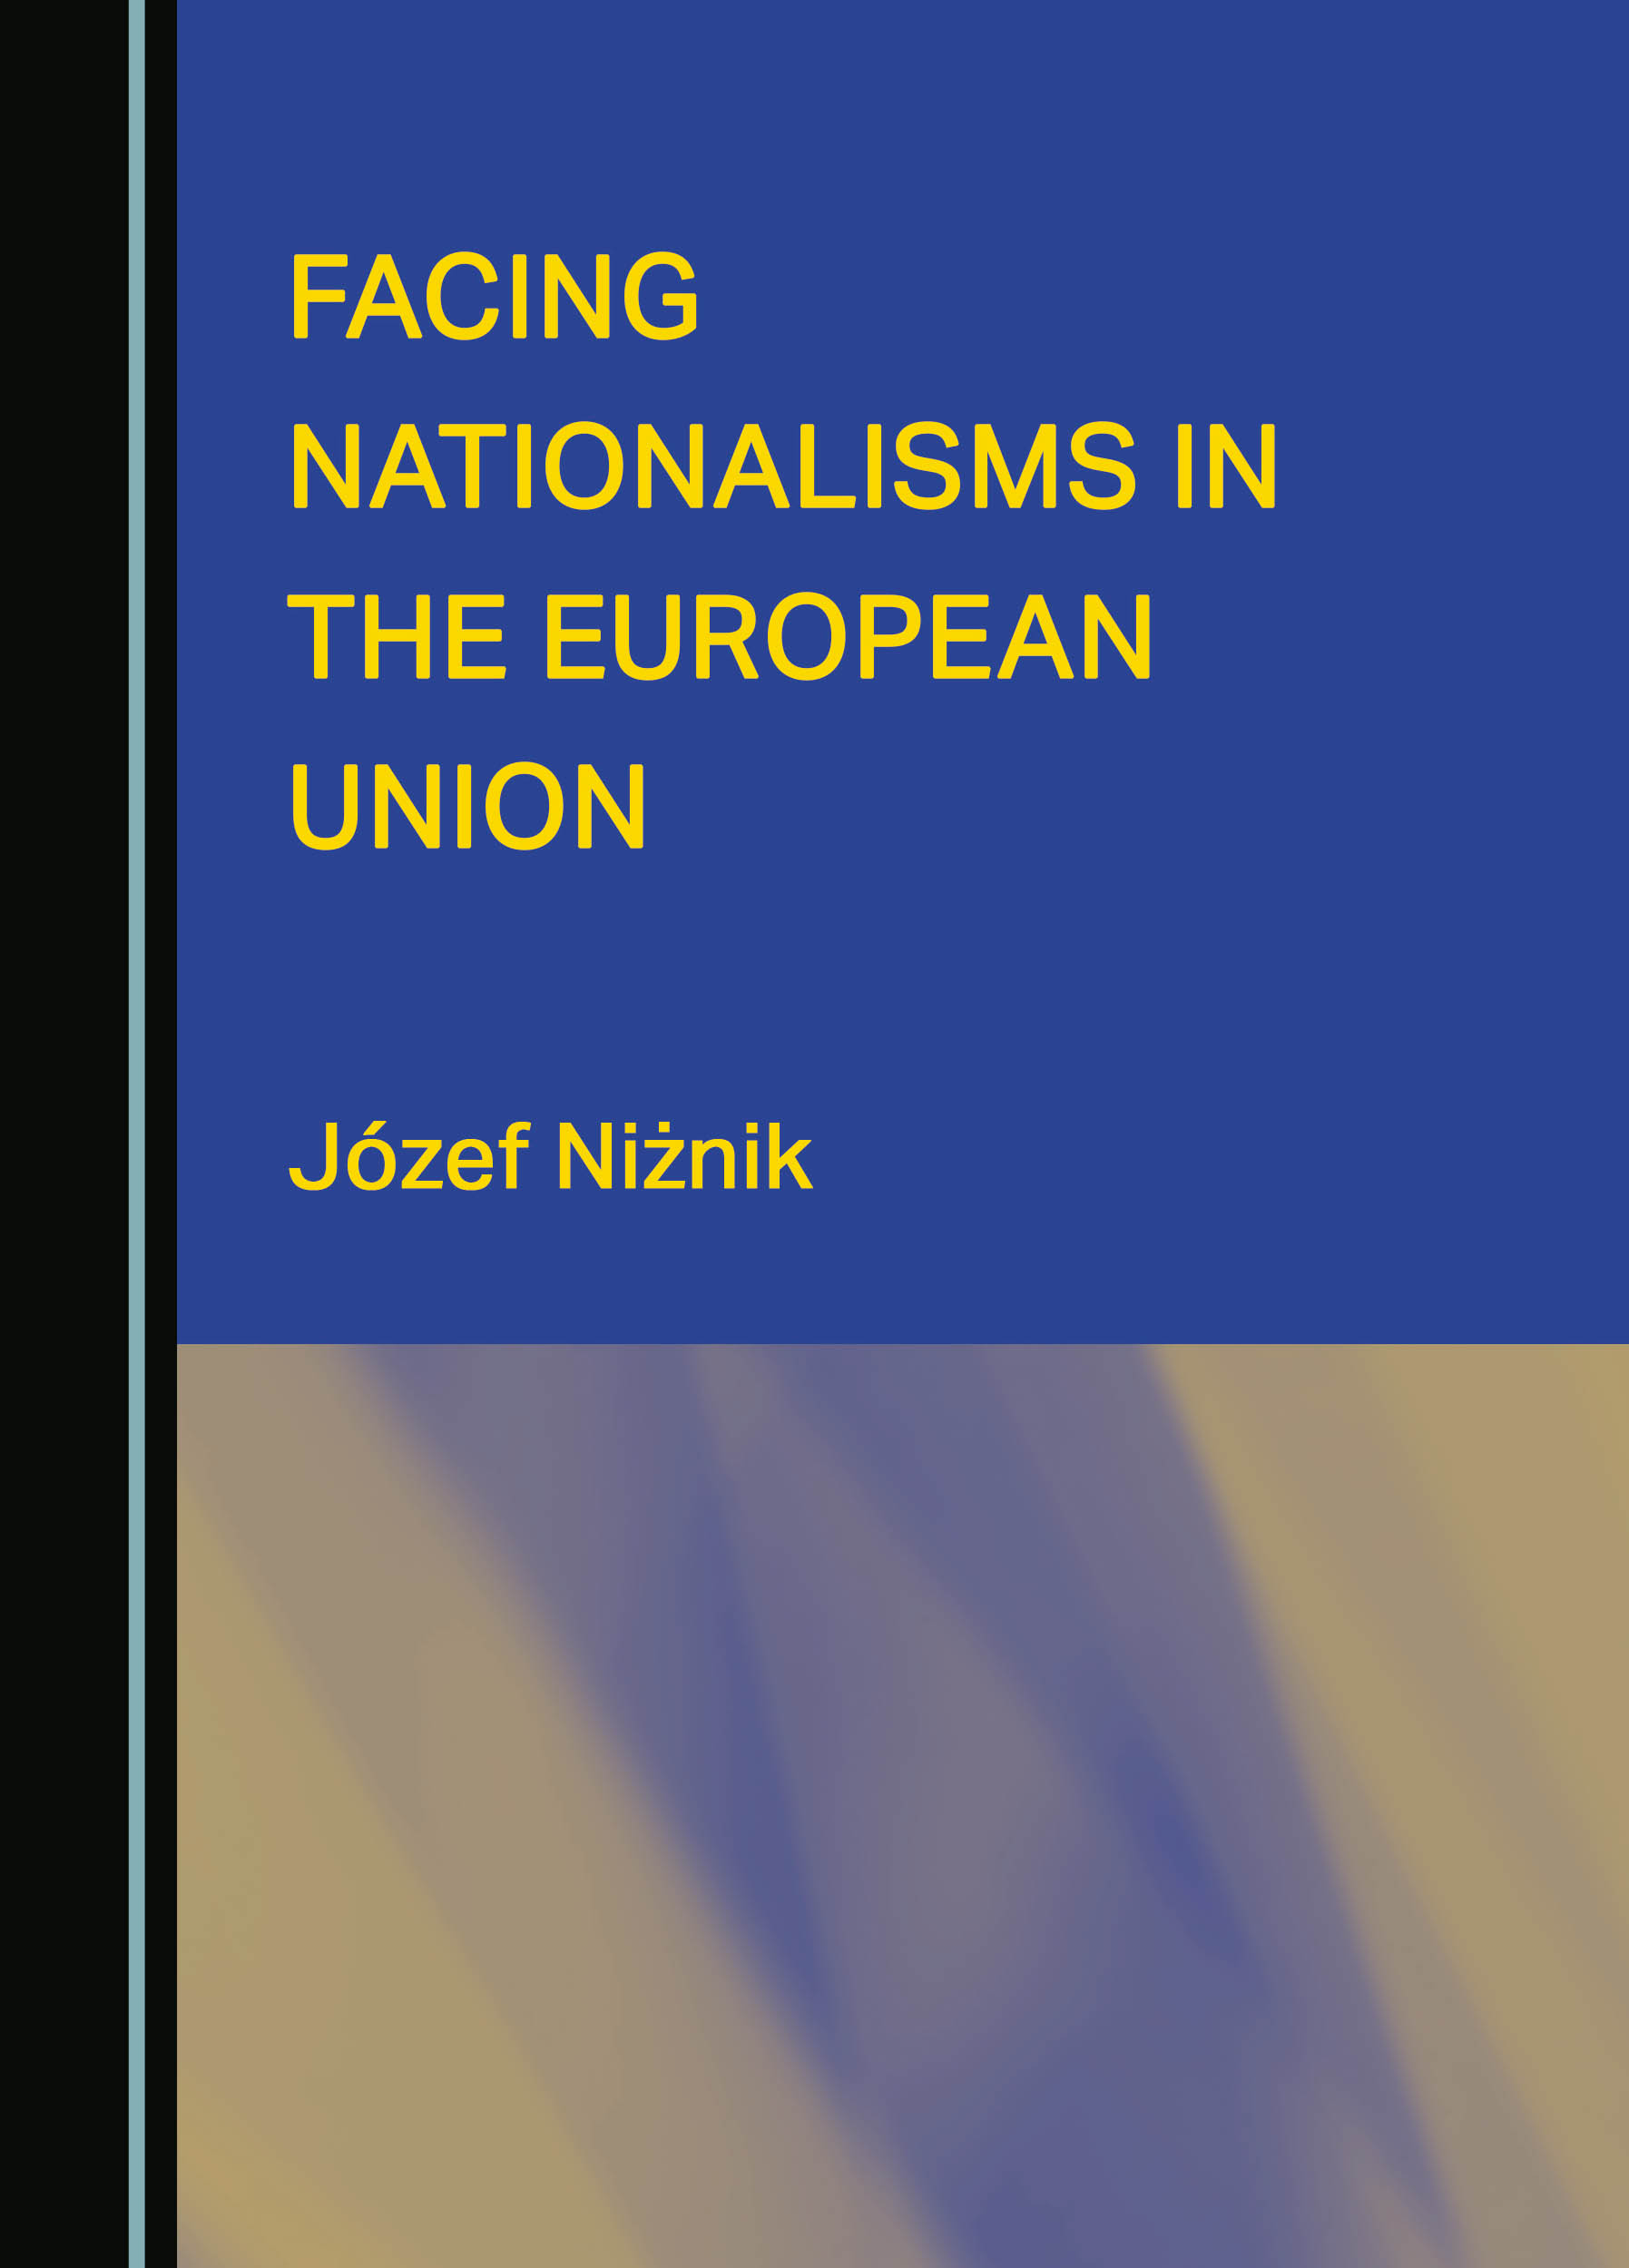 Facing nationalisms in the European Union